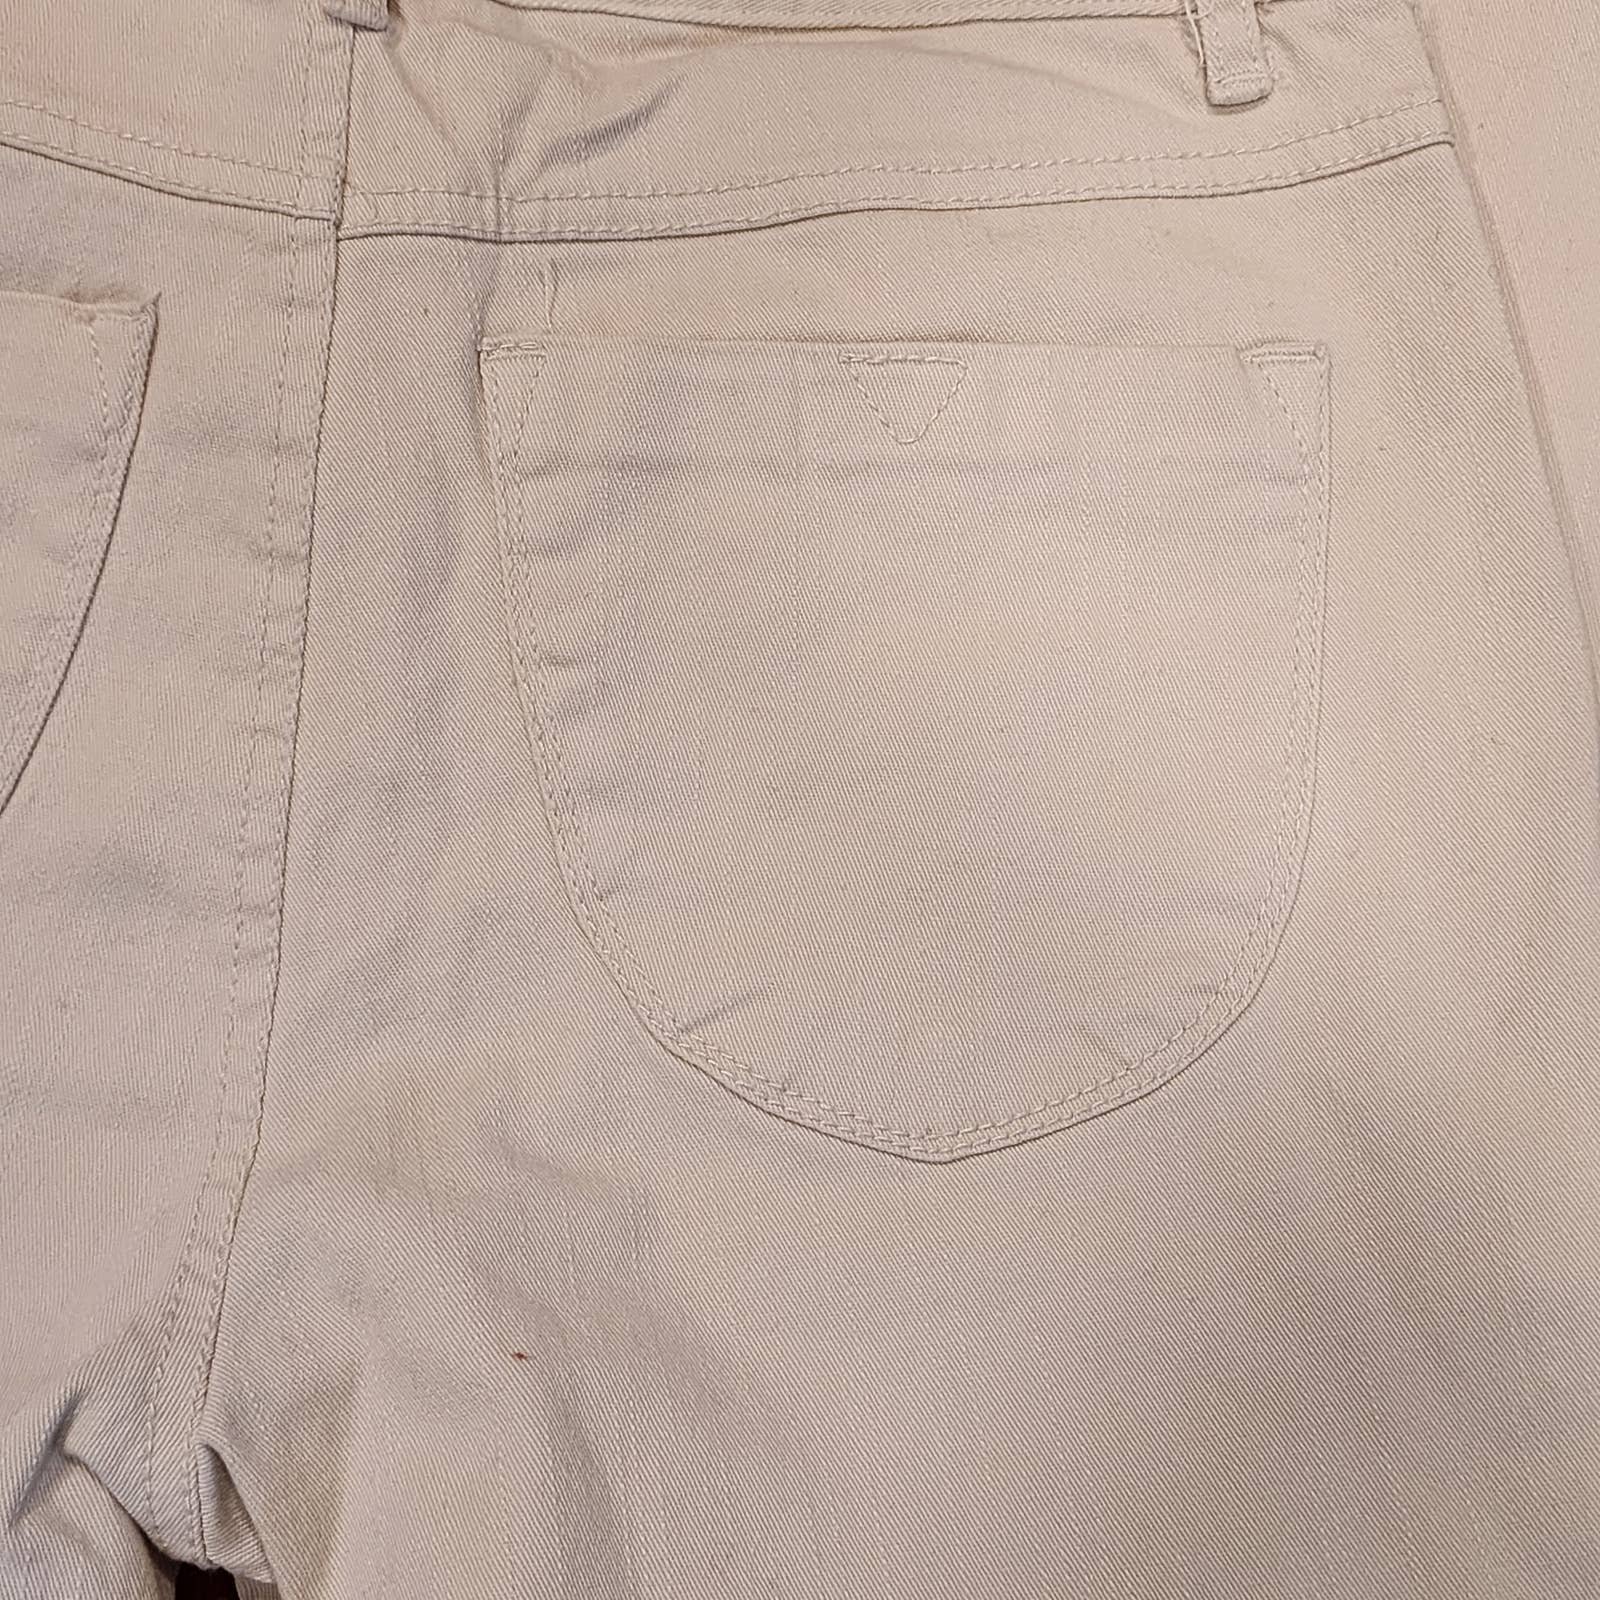 large selection Puntodue Cream Skinny Jeans Size 4 jDZ5rCSFw Discount